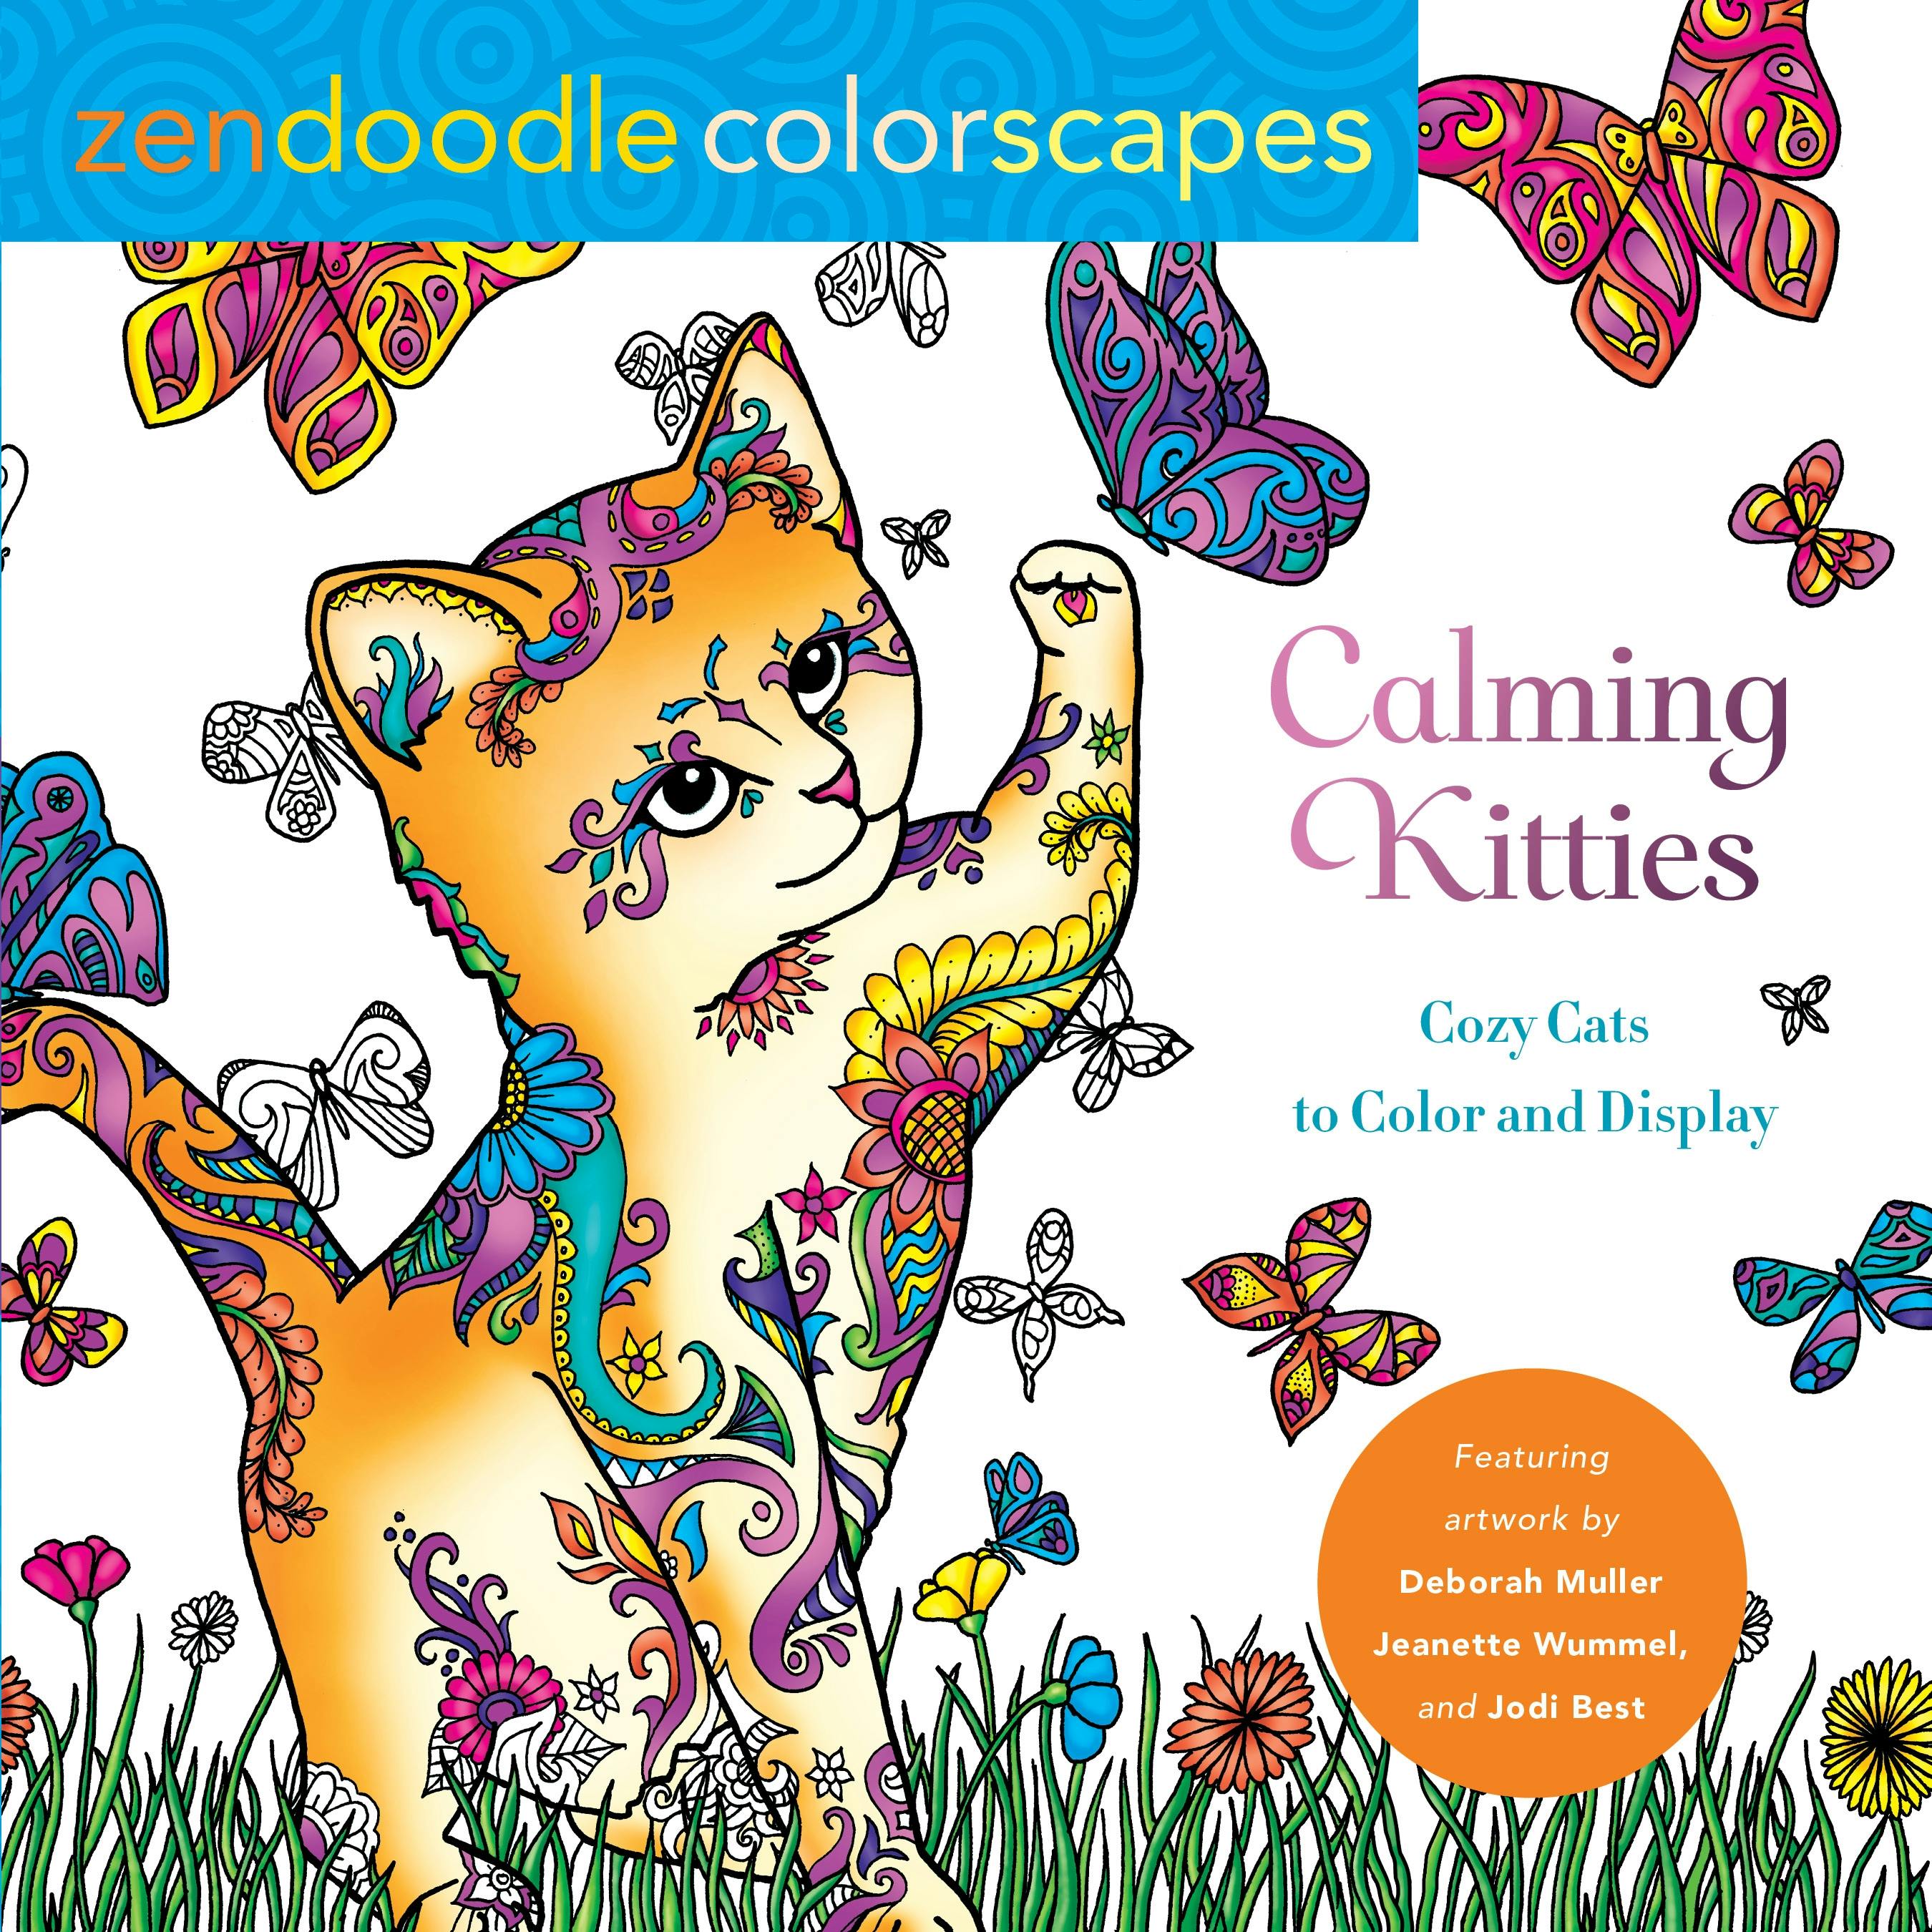 Image of Zendoodle Colorscapes: Calming Kitties